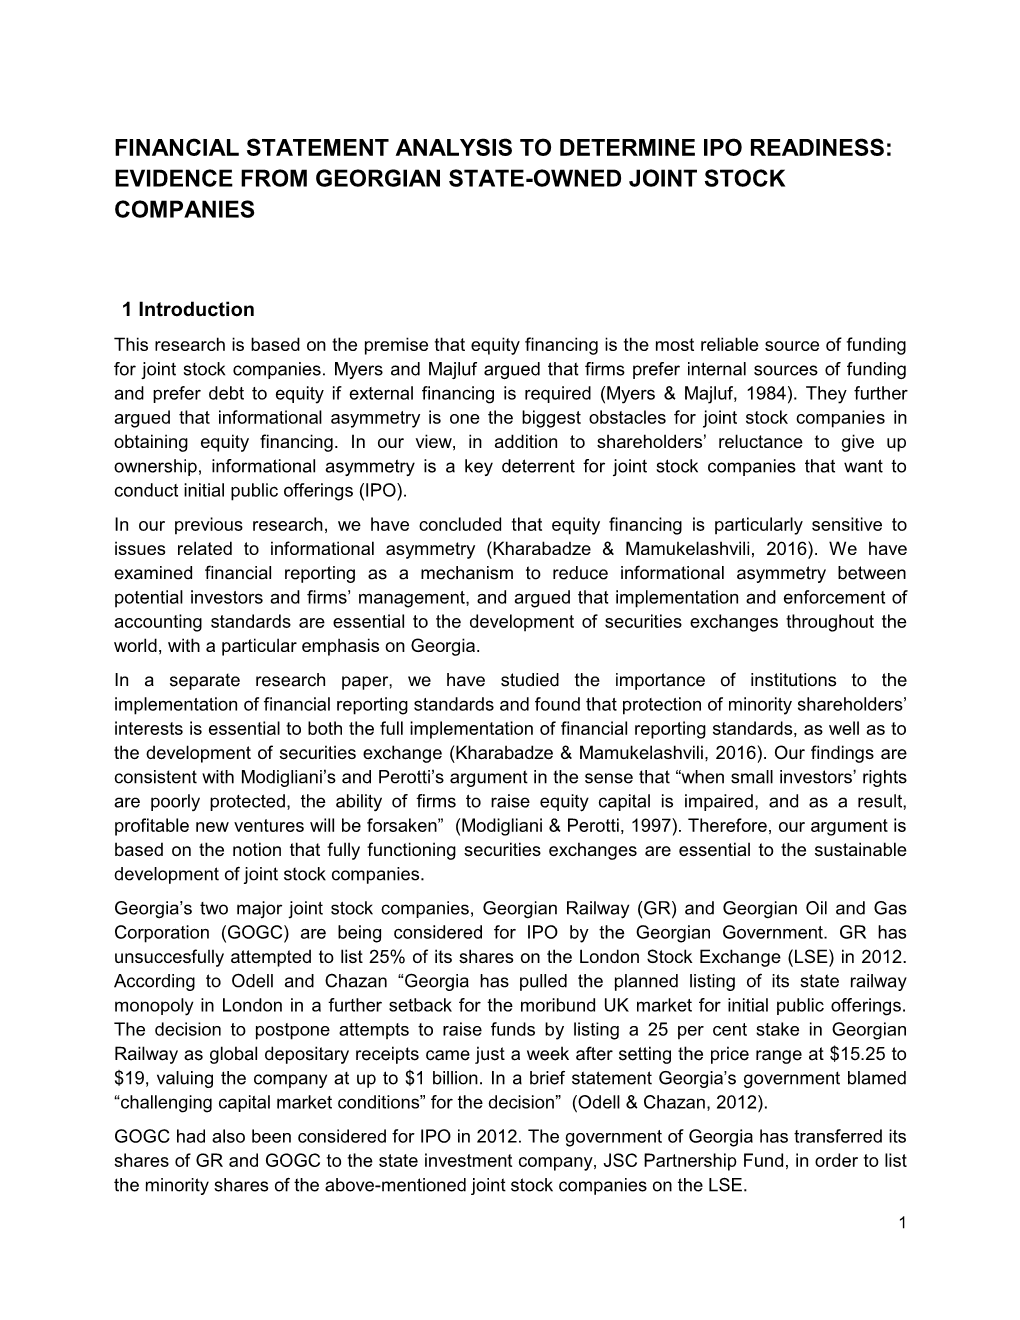 Evidence from Georgian State-Owned Joint Stock Companies